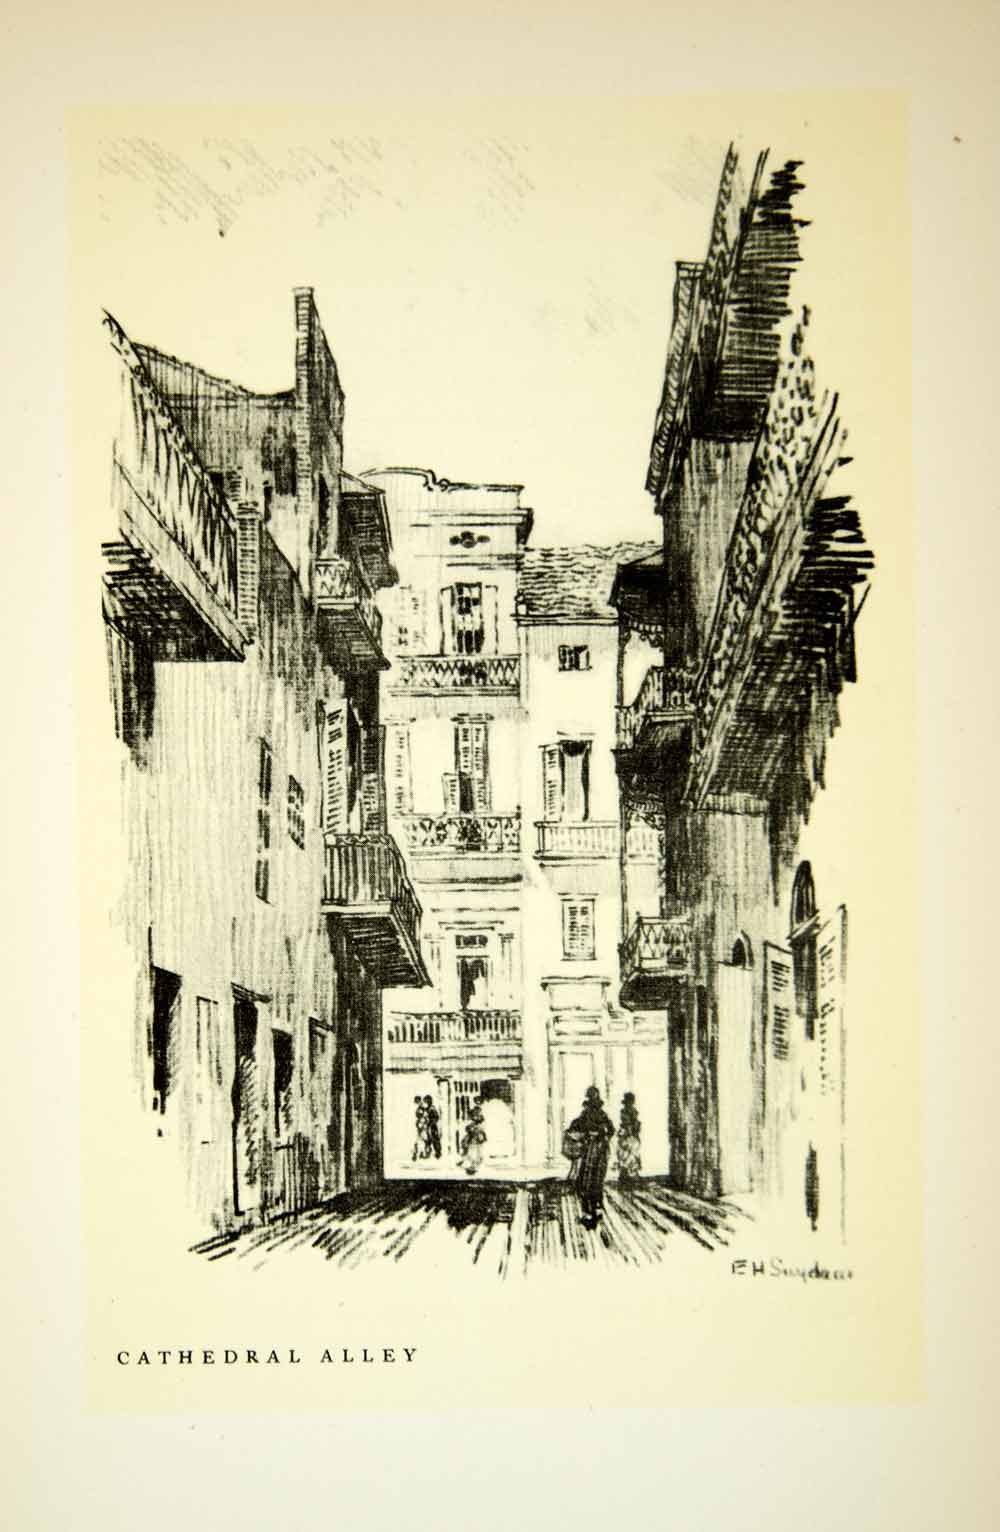 1930 Print New Orleans St. Louis Cathedral Alley French Quarter E H Suydam FNO1